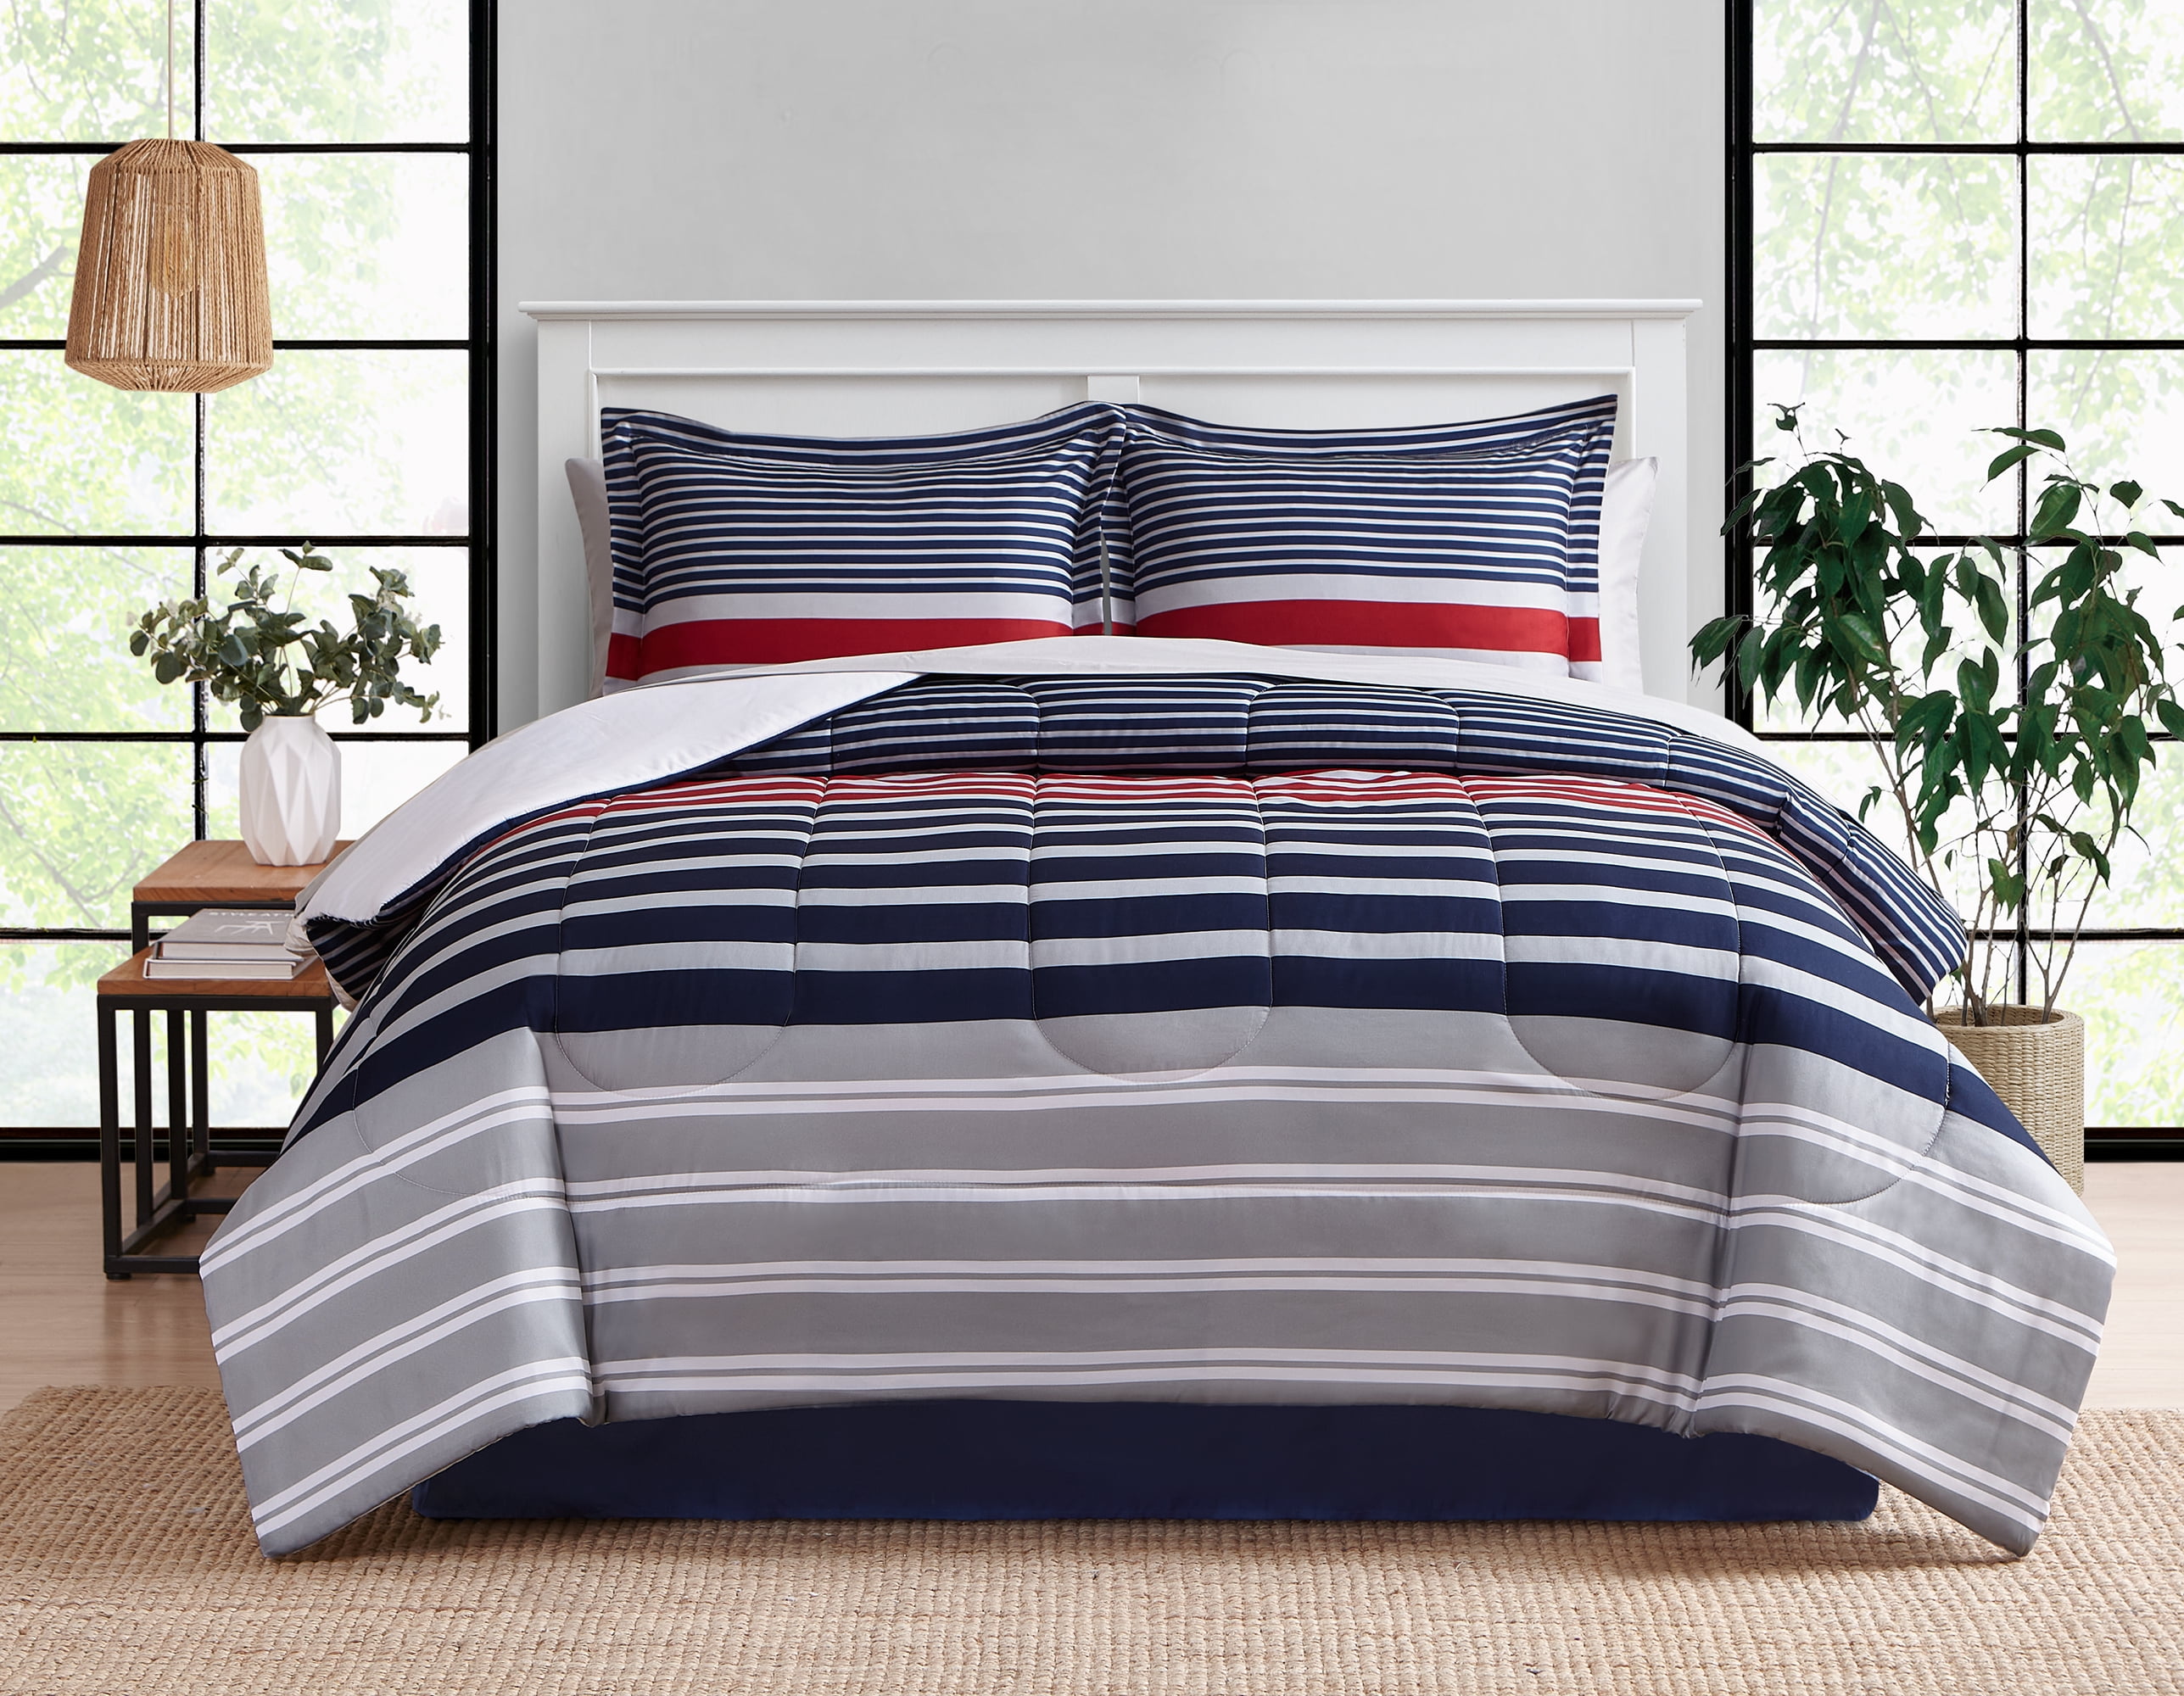 Red & Blue Nautical Stripe Reversible CAL King Comforter 8 Piece Bed In Bag 